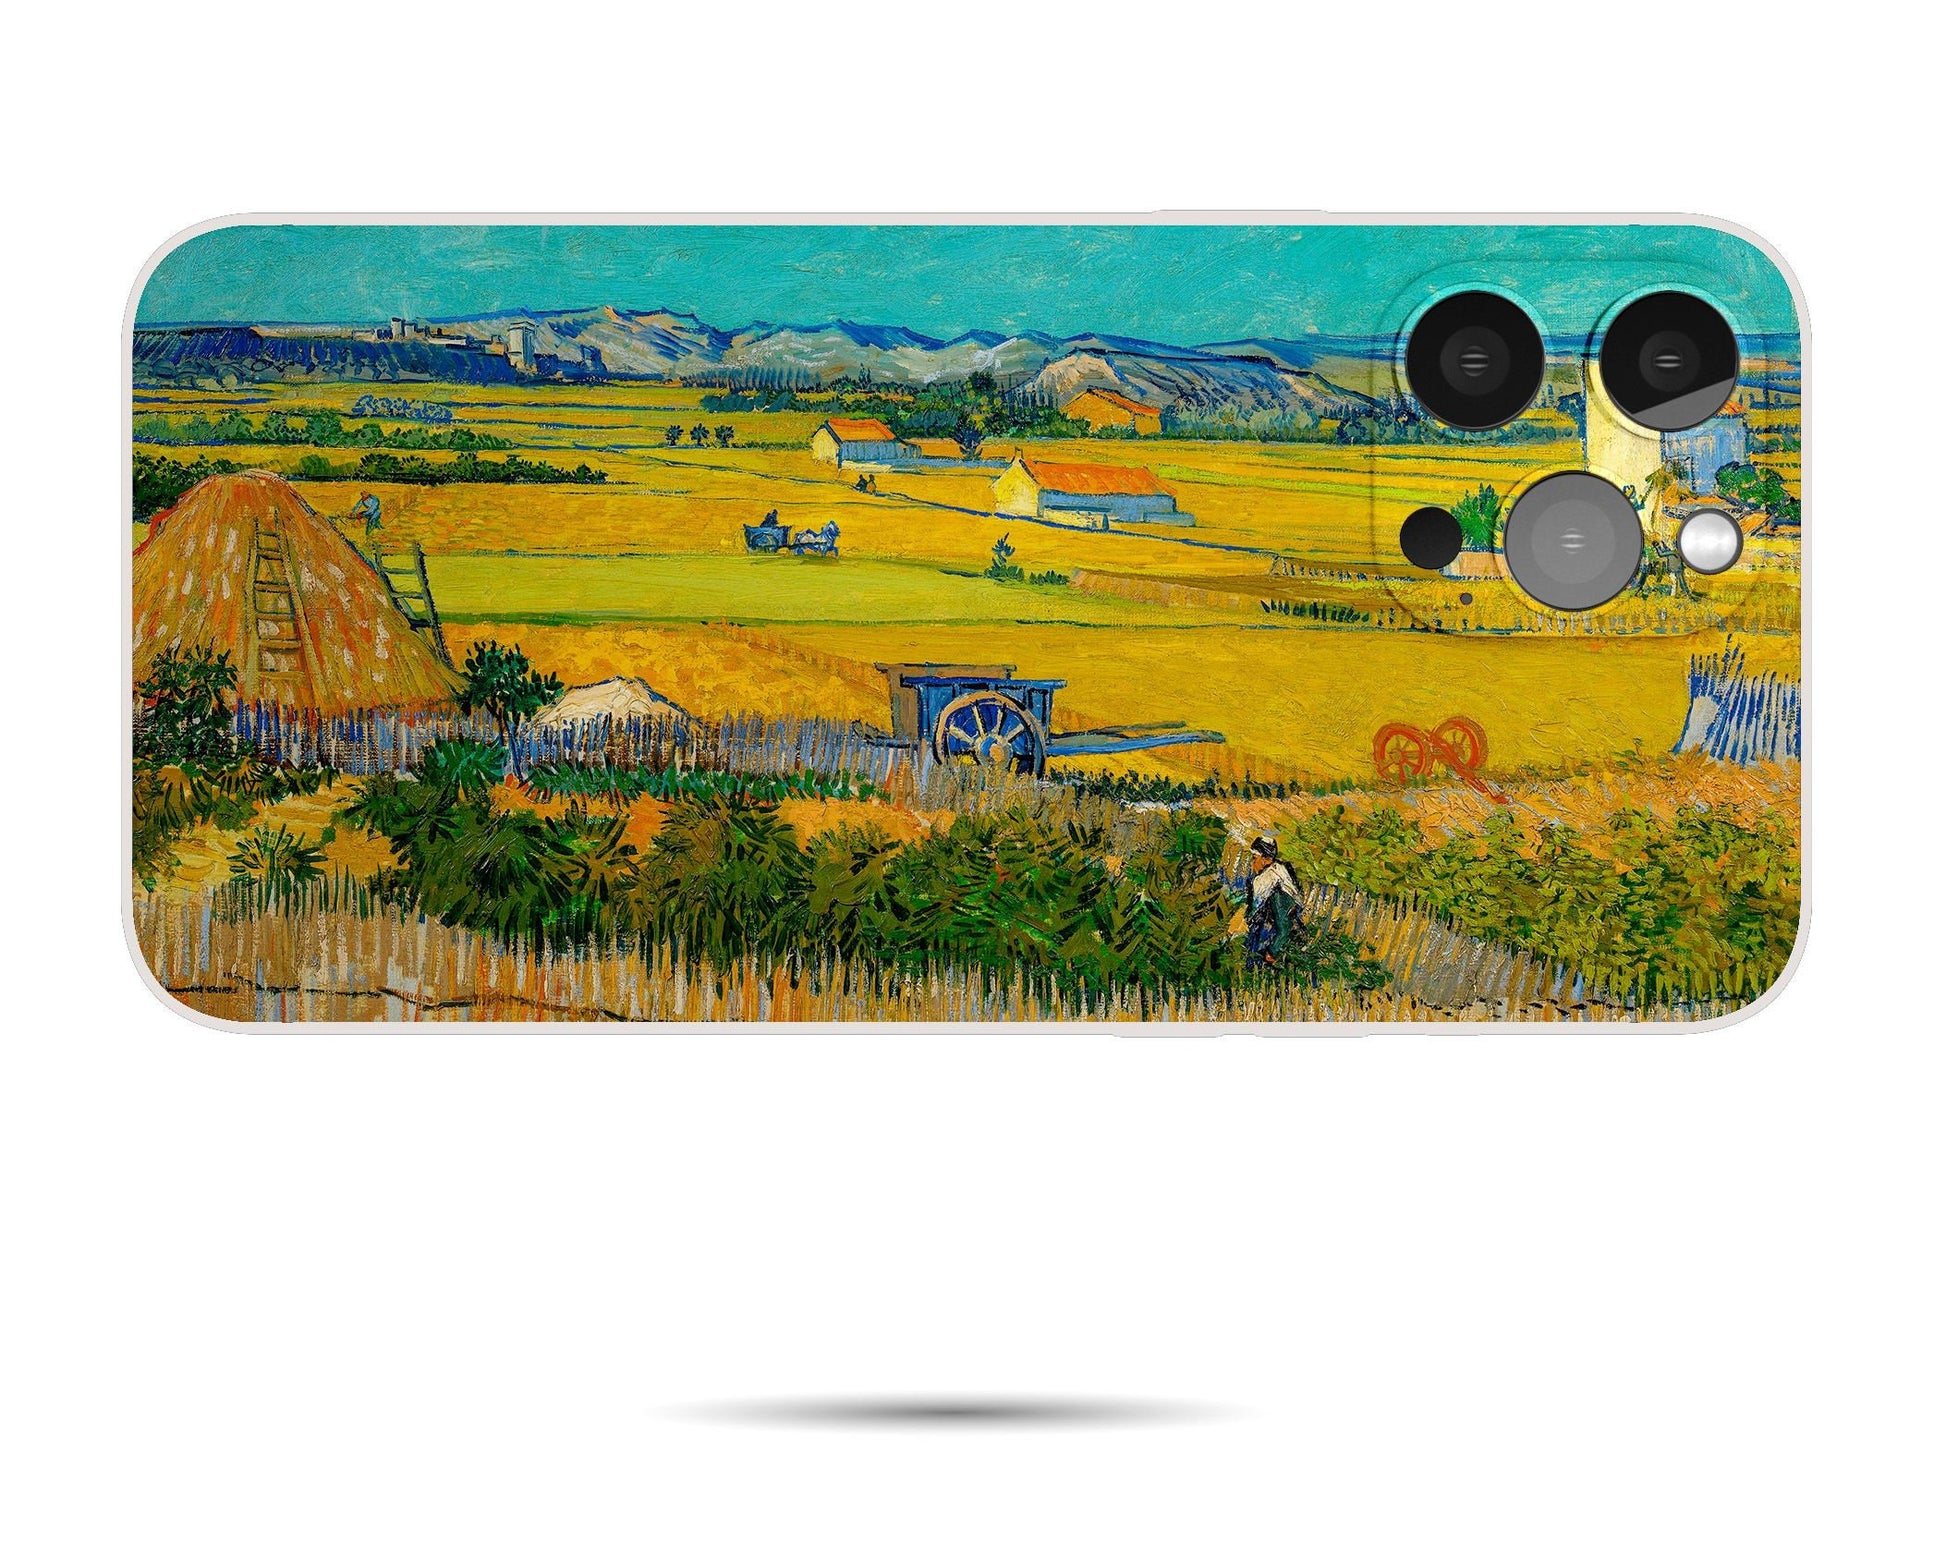 Vincent Van Gogh The Harvest Iphone Cover, Iphone 14 Pro Case, Iphone 7 Iphone 8 Plus Case Art, Iphone Case Protective, Iphone Case Silicone